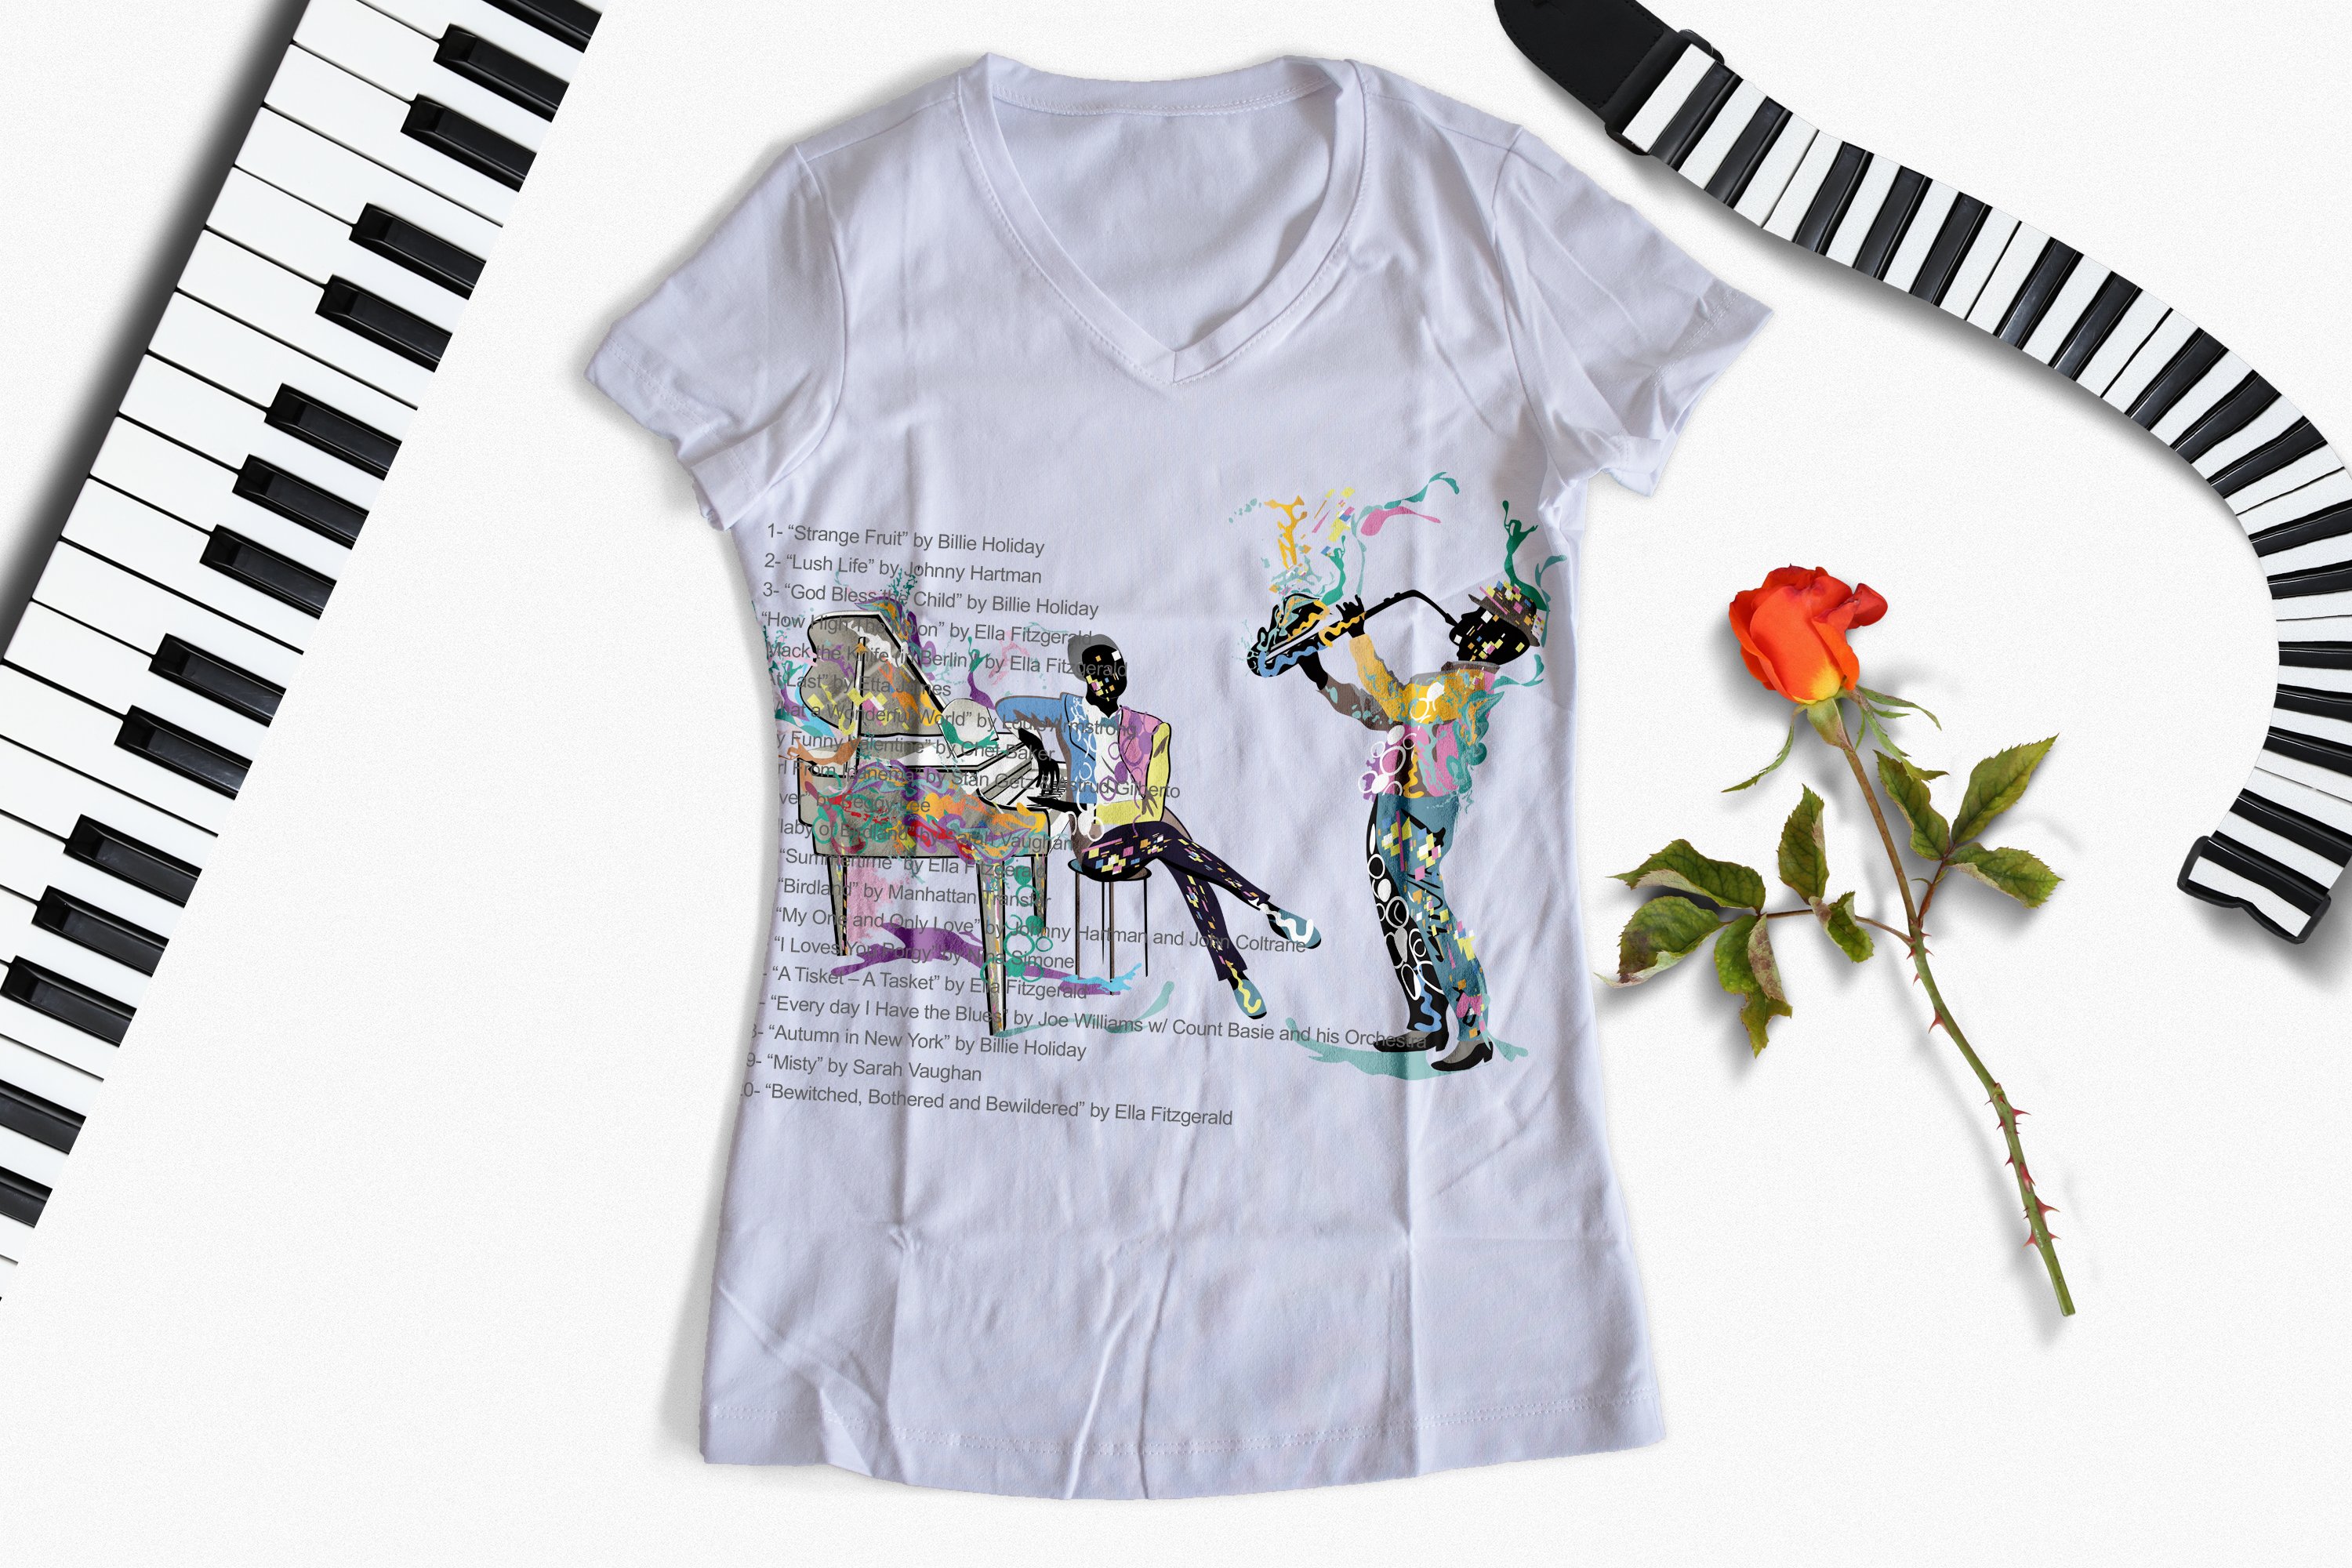 t shirt and music rose scened 751